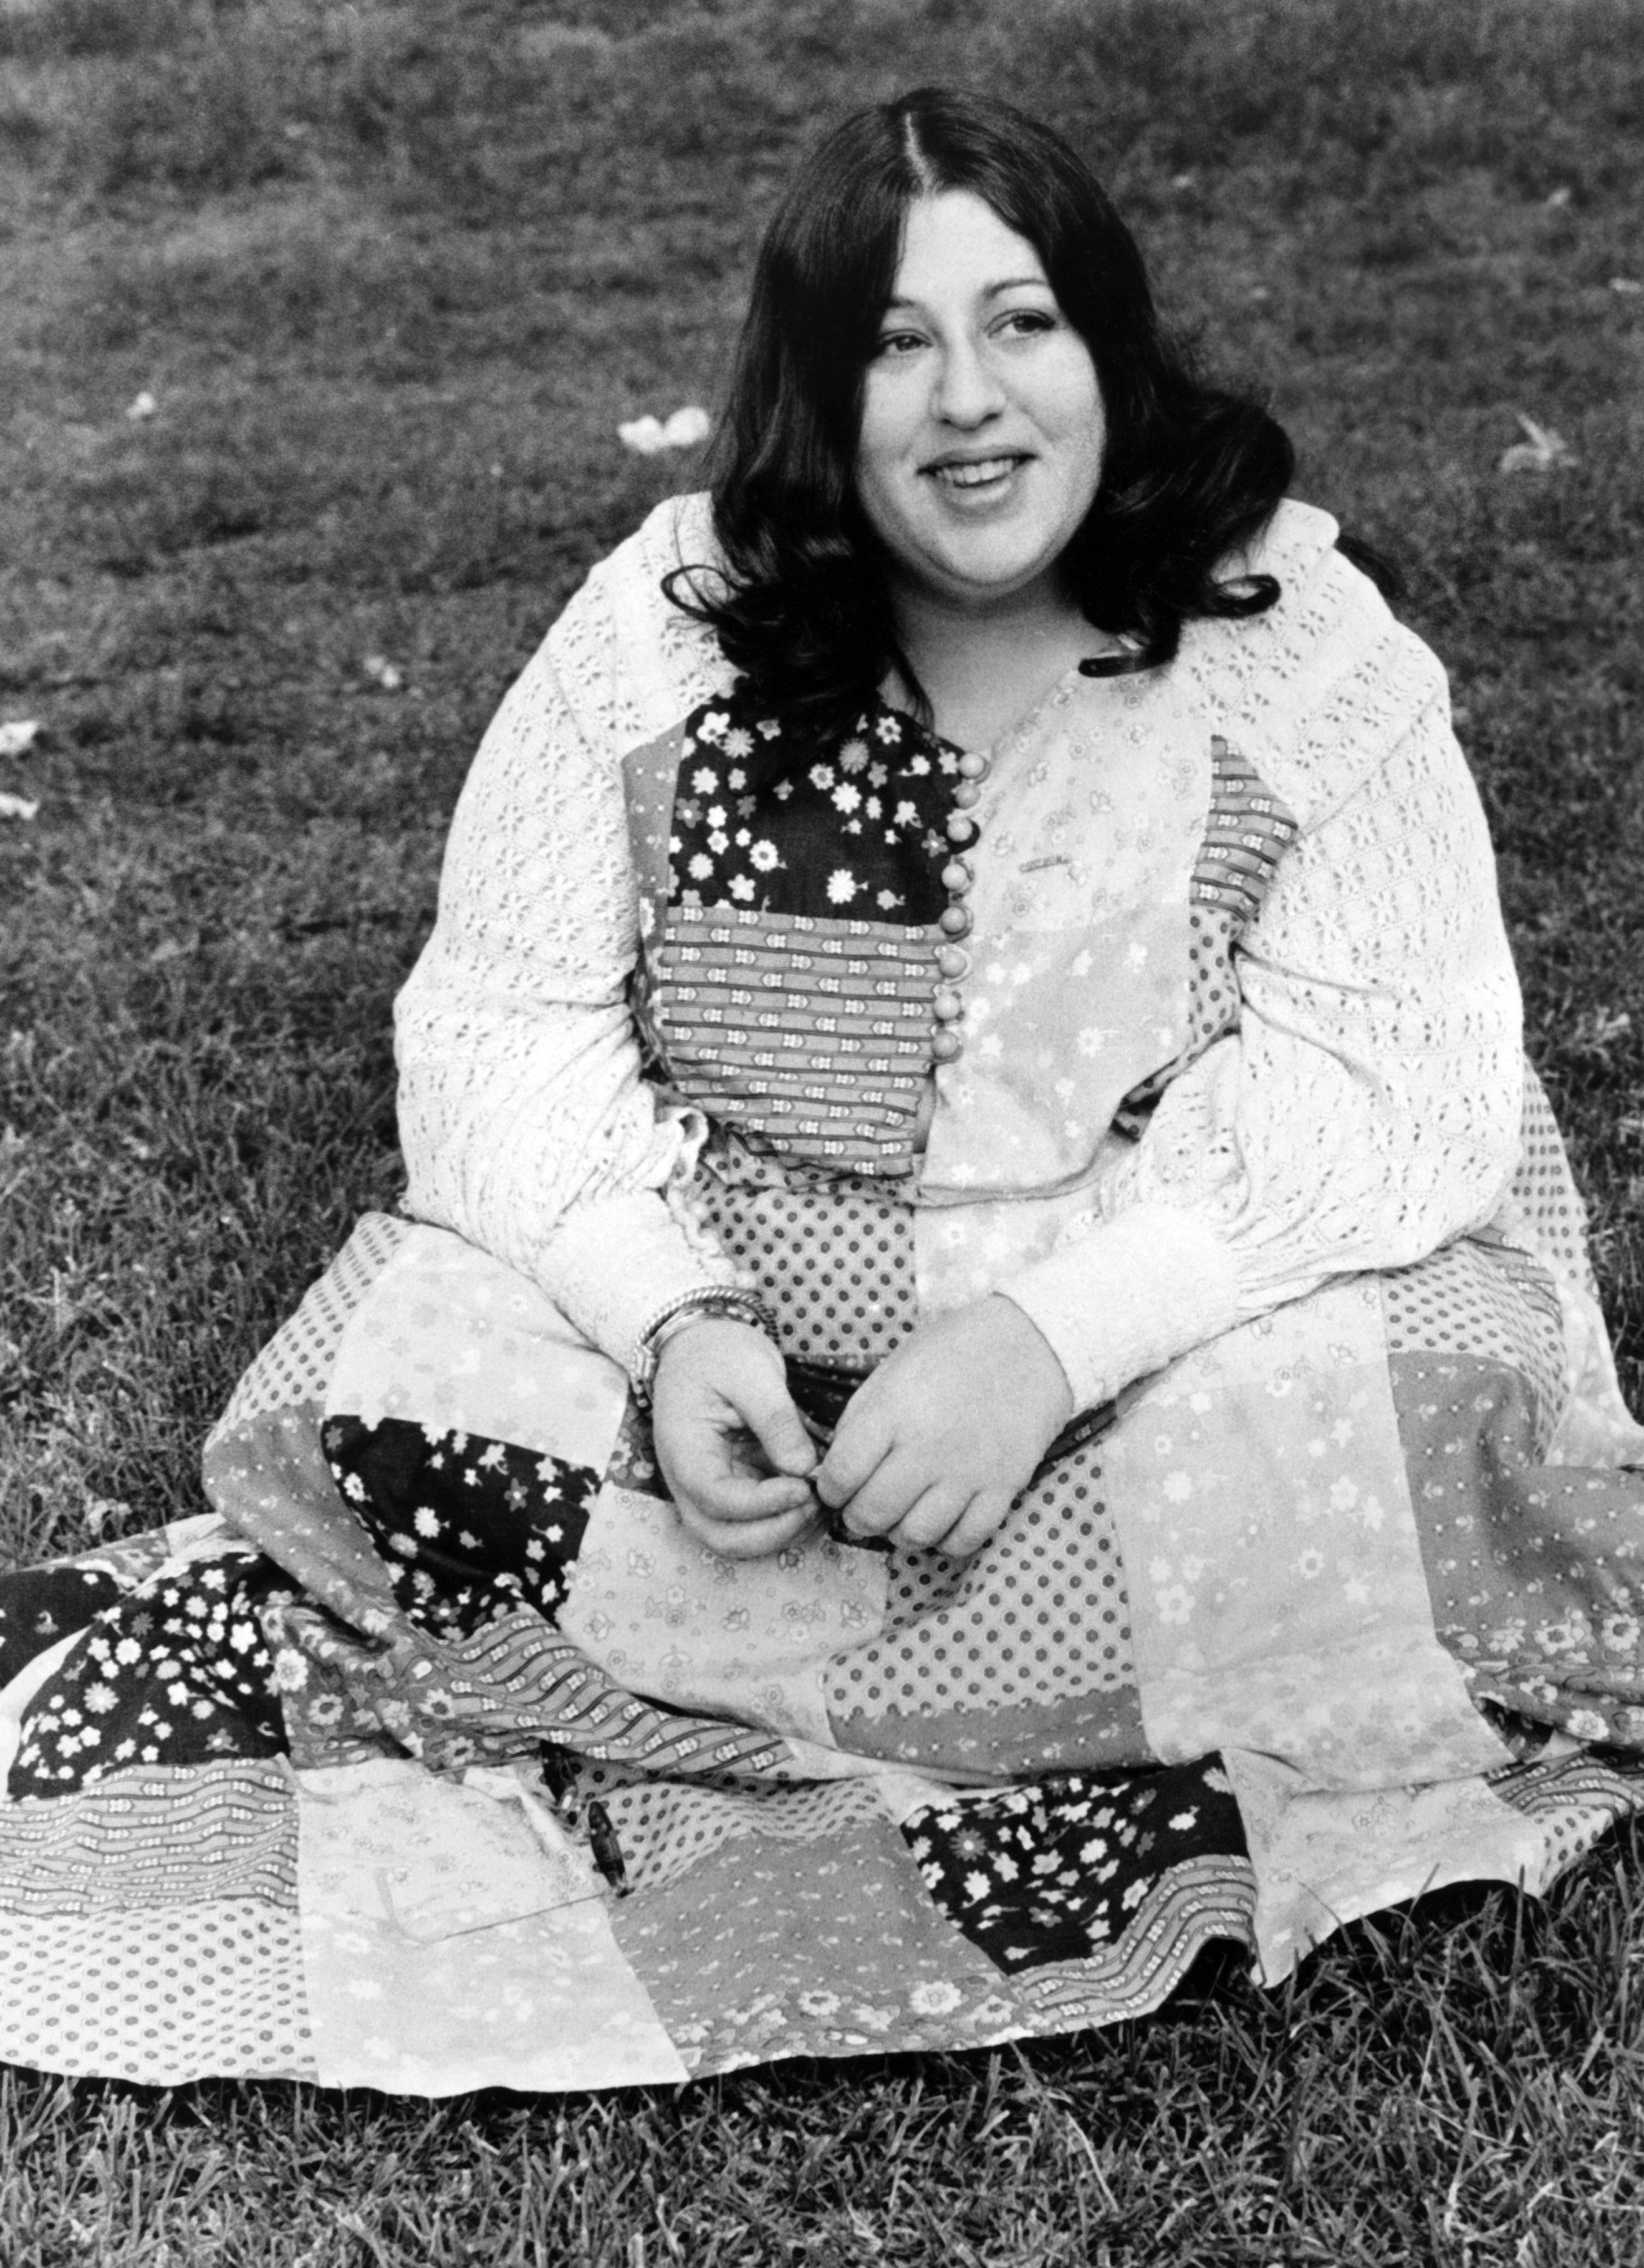 Mama Cass Elliot poses for a portrat for her solo career in 1968 in Los Angeles. | Photo by Michael Ochs Archives/Getty Images